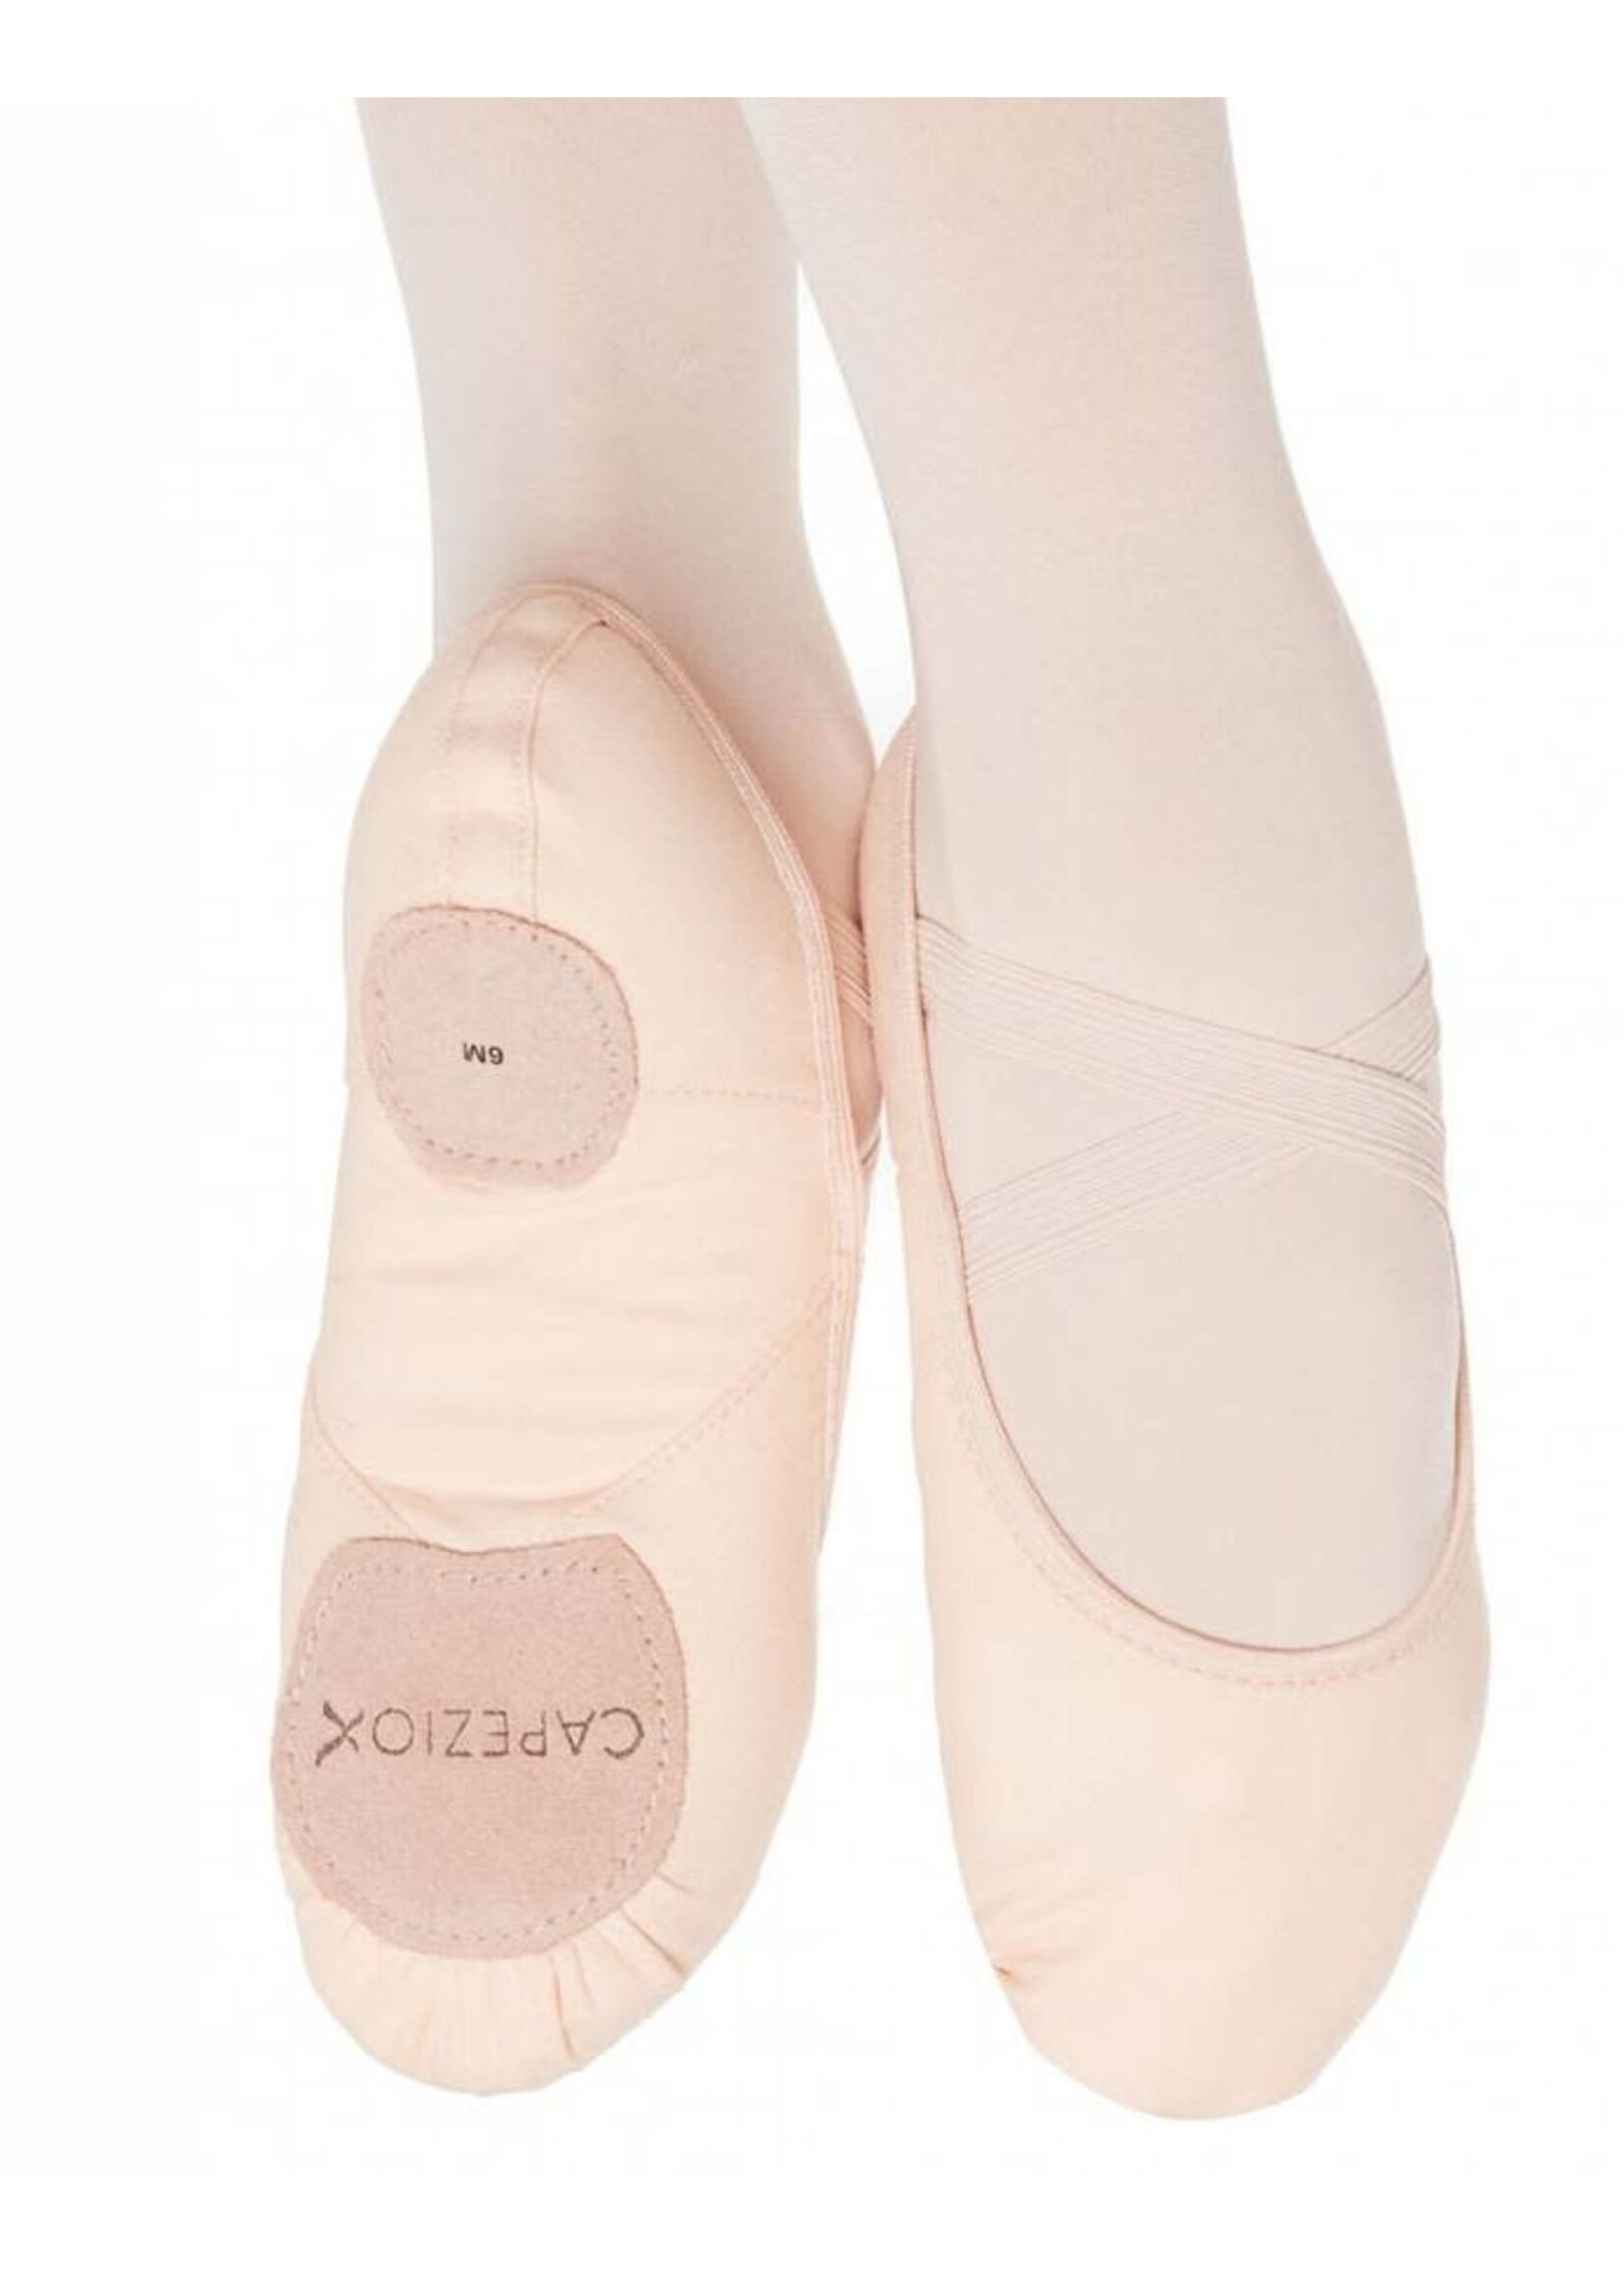 CAPEZIO Ballet Slippers Shoes PINK Big Girl Size 3 M for sale